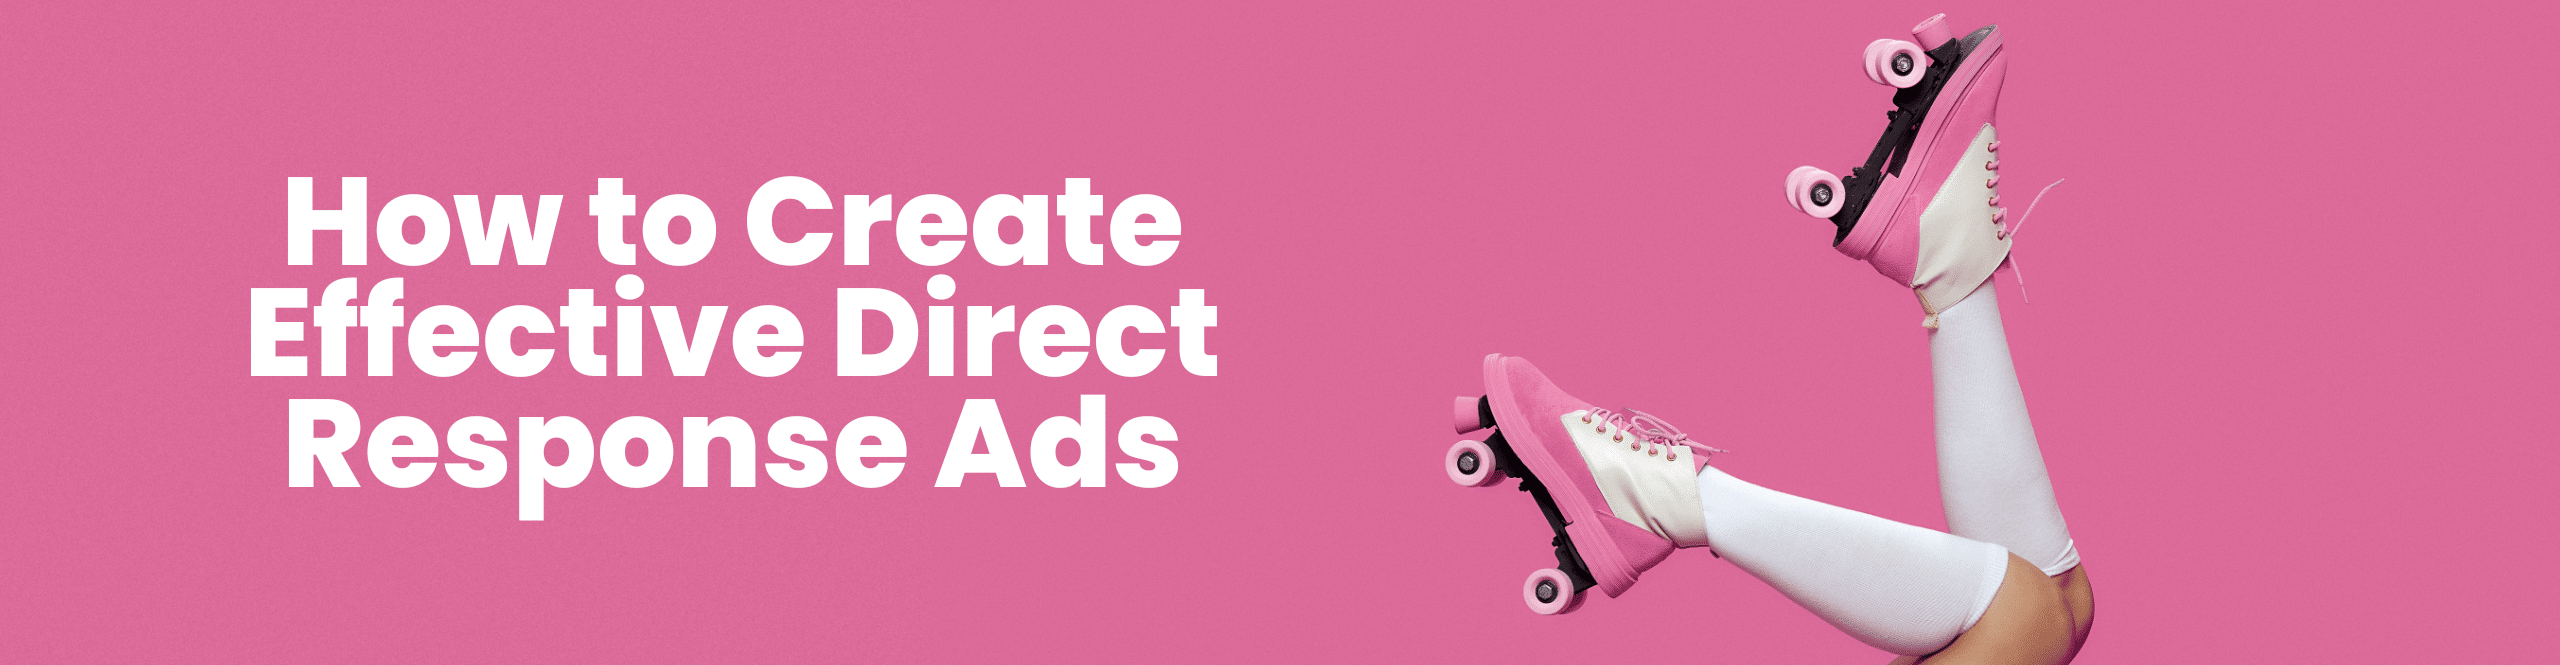 How to Create Effective Direct Response Ads